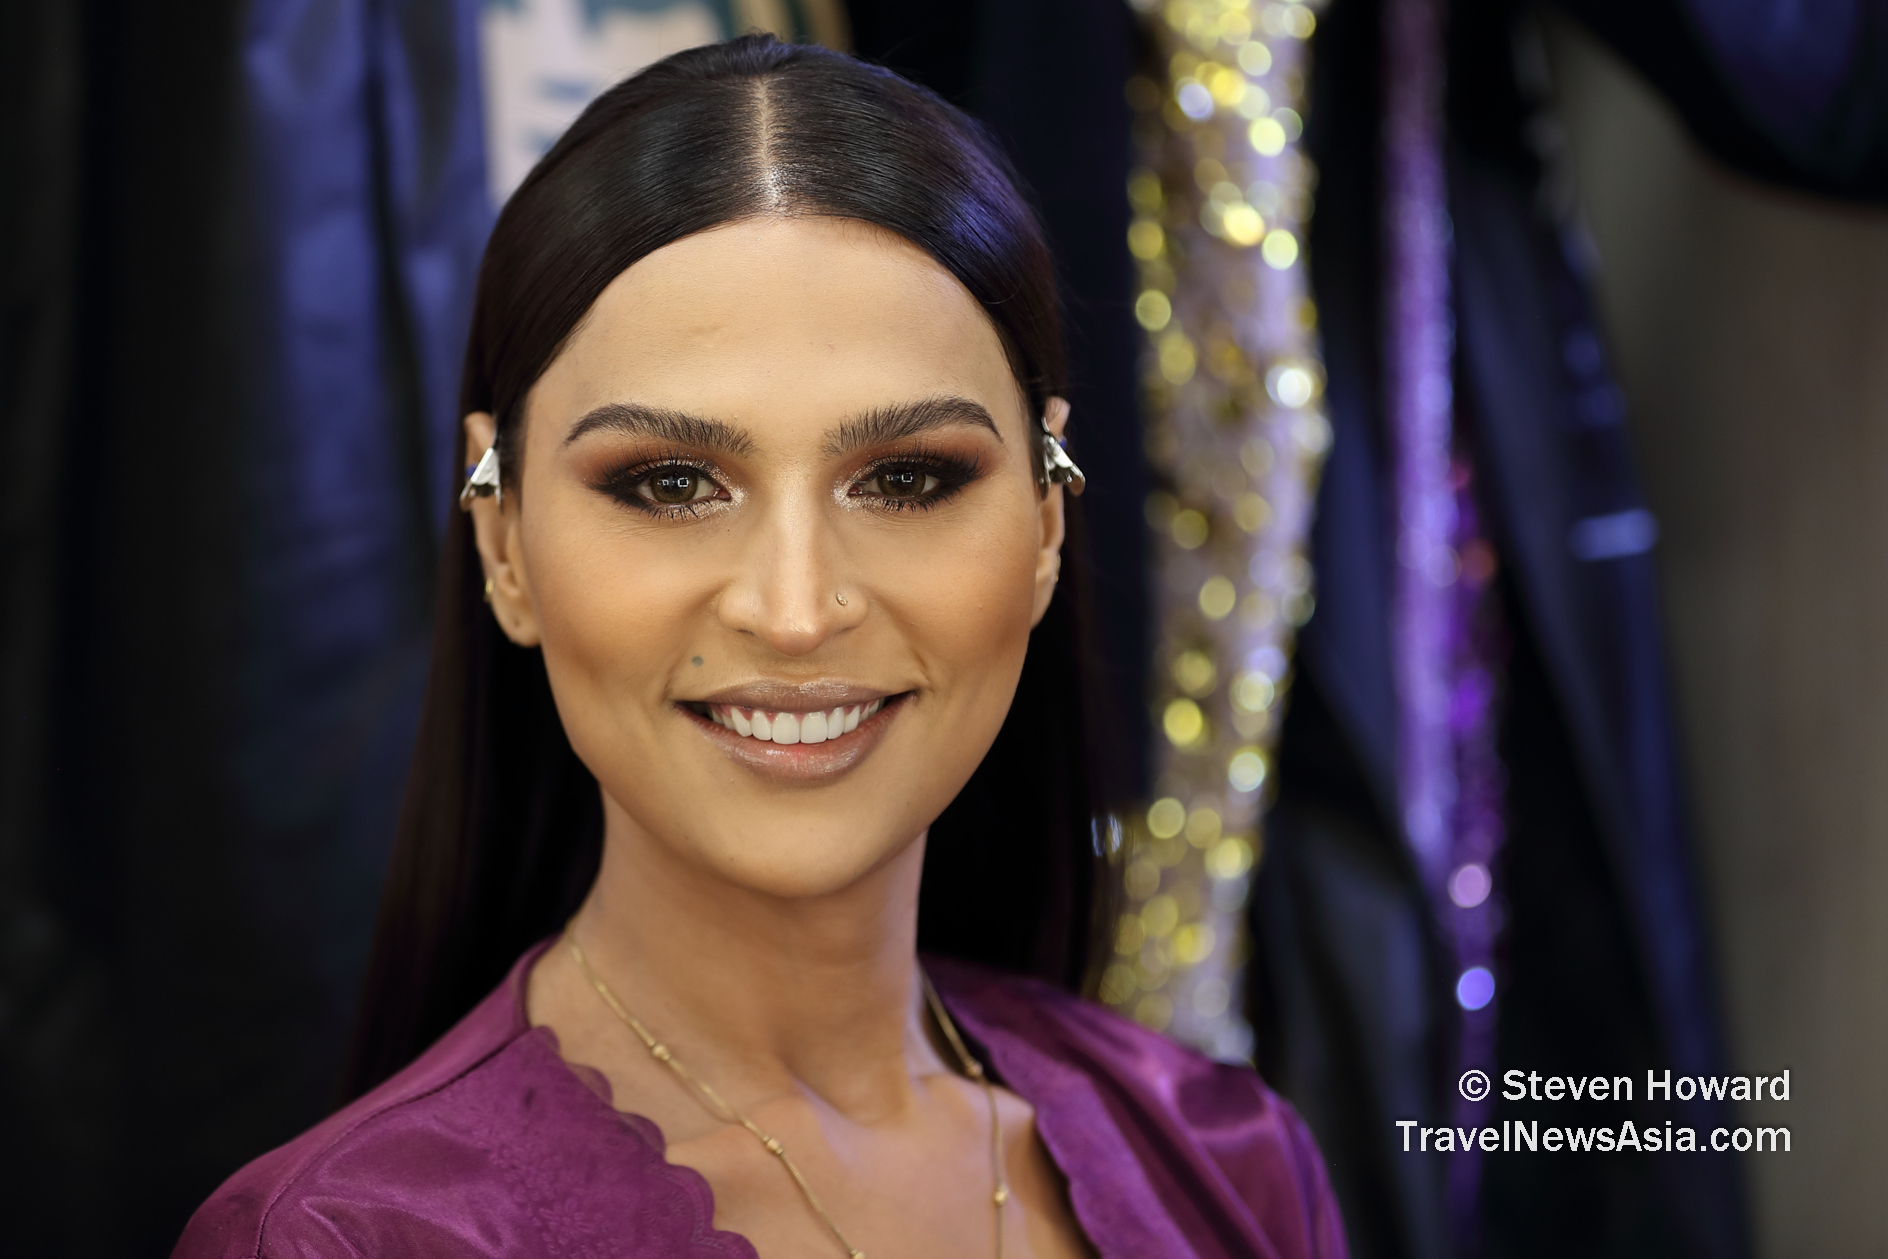 Pictures from Miss International Queen 2022 Transgender Beauty Pageant in Pattaya, Thailand. Pictures by Steven Howard of TravelNewsAsia.com